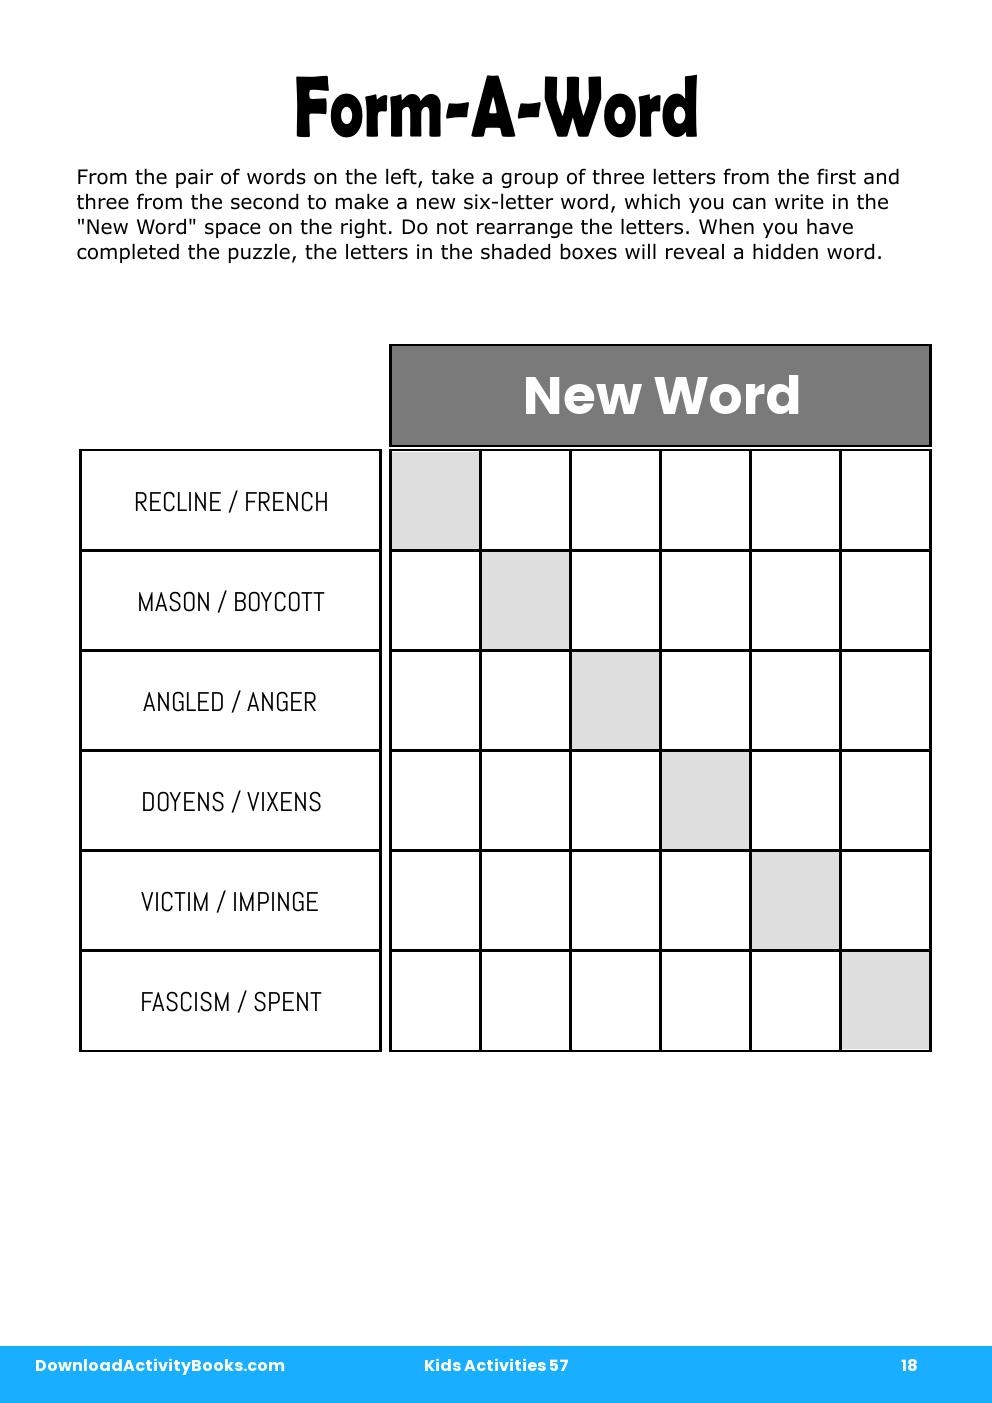 Form-A-Word in Kids Activities 57